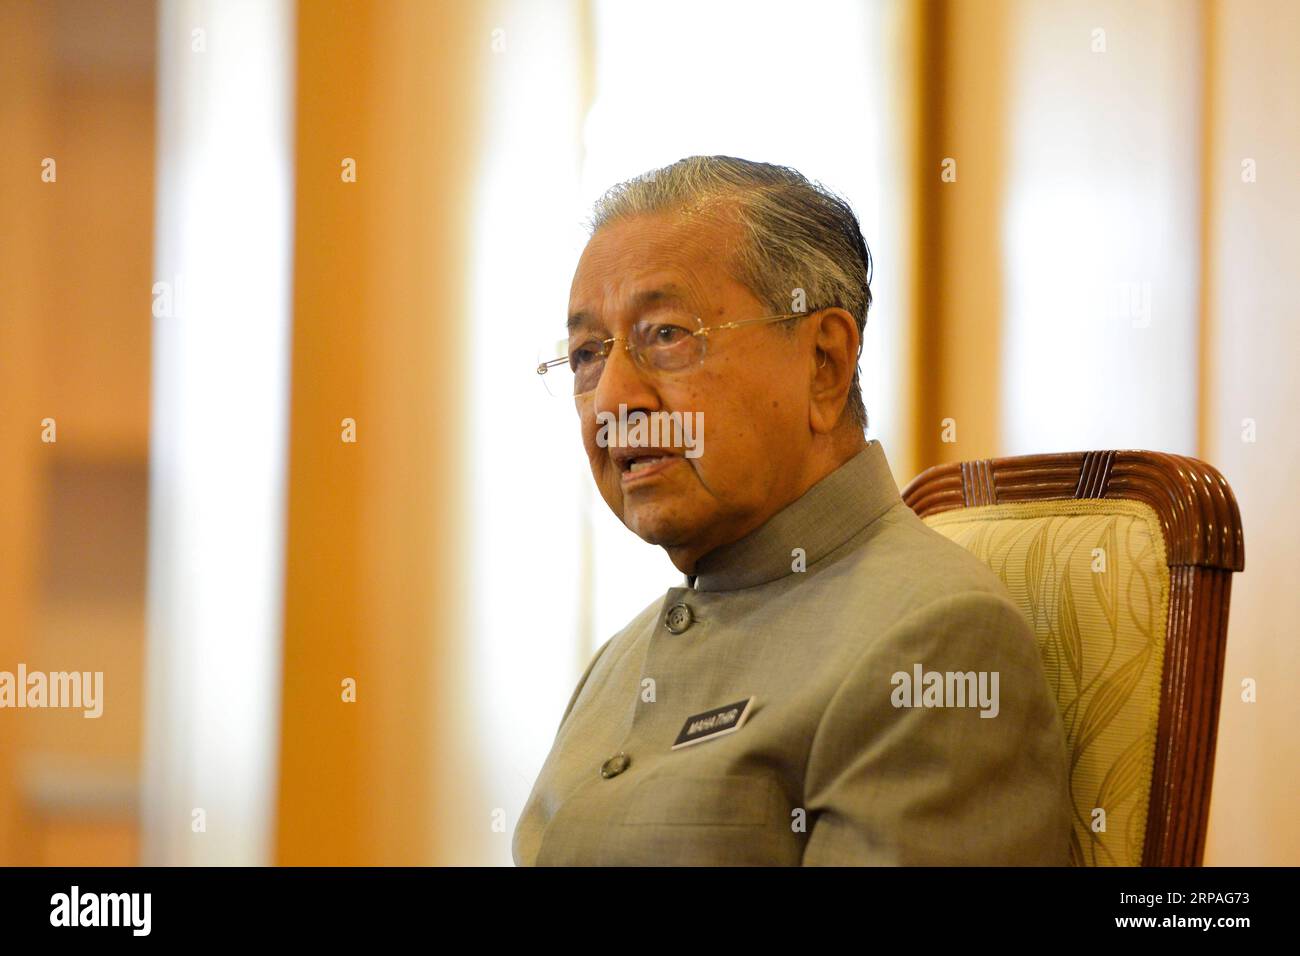 (190509) -- PUTRAJAYA, May 9, 2019 (Xinhua) -- Malaysian Prime Minister Mahathir Mohamad attends a press conference to mark the first year since his Pakatan Harapan (PH) coalition won power at the national polls on May 9 last year, in Putrajaya, Malaysia, May 9, 2019. Malaysia has achieved progress in combating corruption and in restoring government institutions after taking over the government in a smooth transition but much remains to be done especially in repairing the national economy, Malaysian Prime Minister Mahathir Mohamad said on Thursday. (Xinhua/Chong Voon Chung) MALAYSIA-PUTRAJAYA- Stock Photo